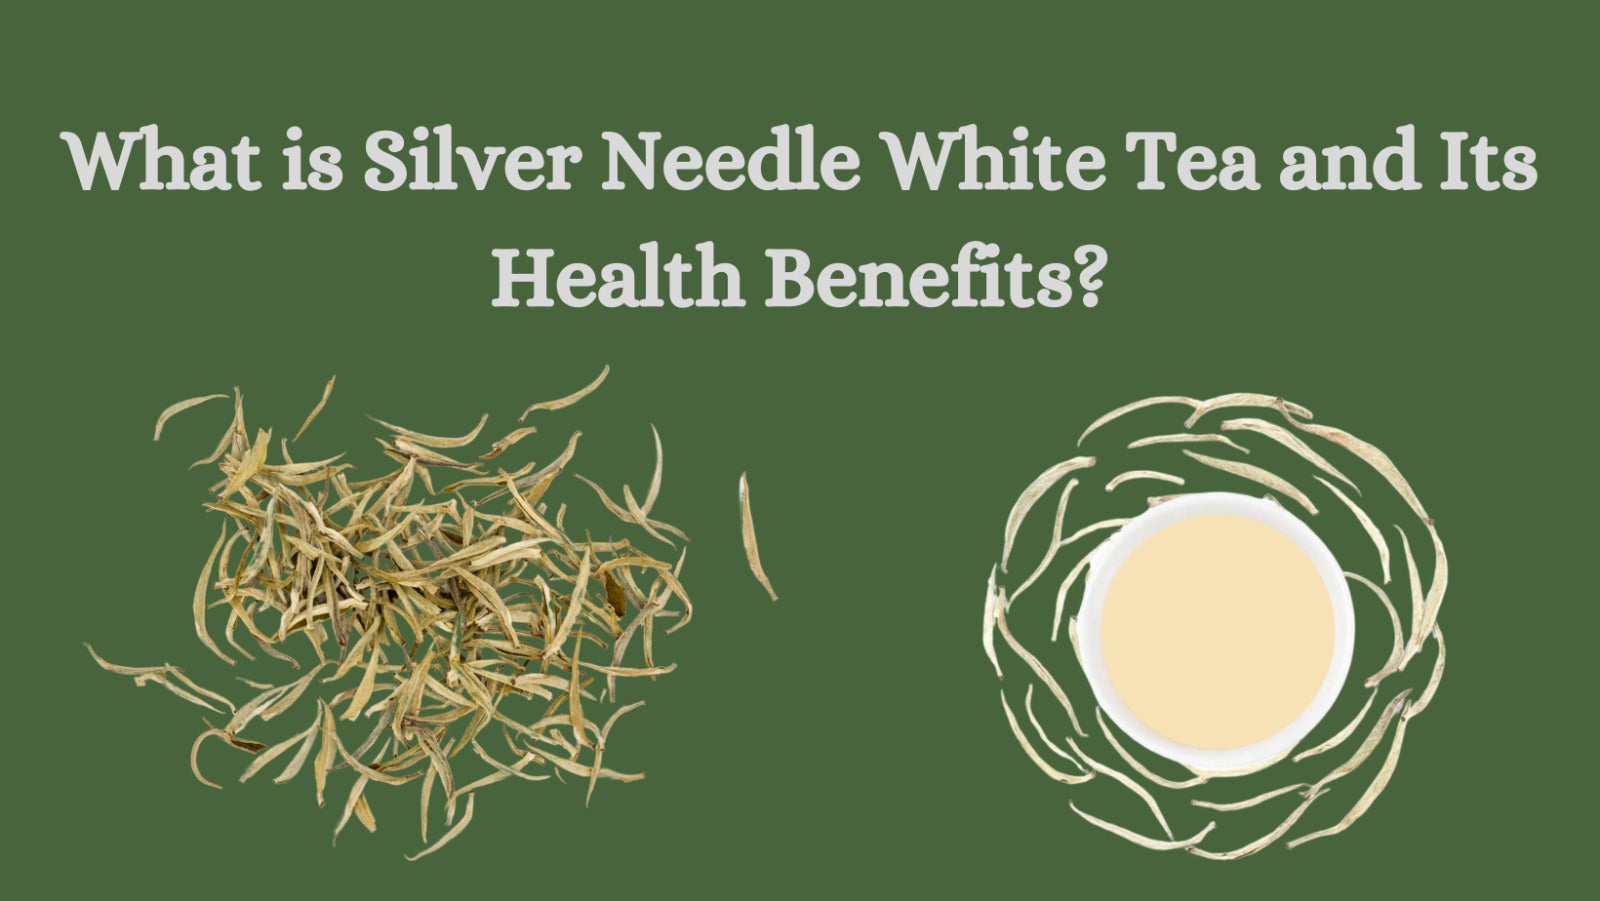 What is Silver Needle White tea and Its Health Benefits